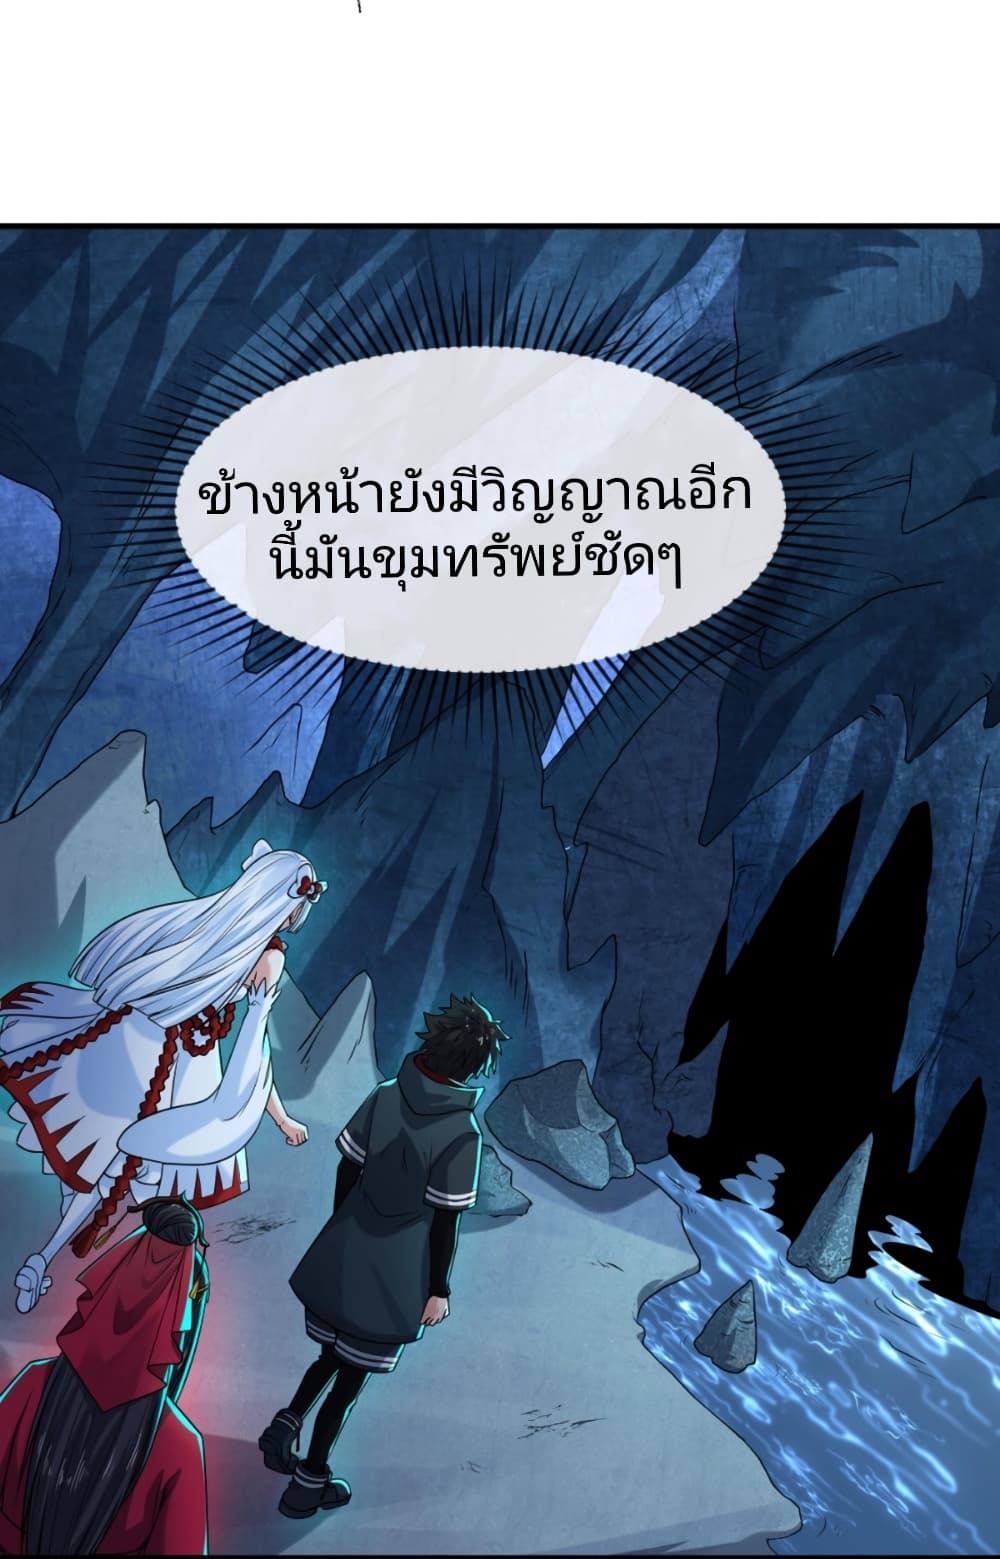 The Age of Ghost Spirits à¸à¸­à¸à¸à¸µà¹ 23 (5)